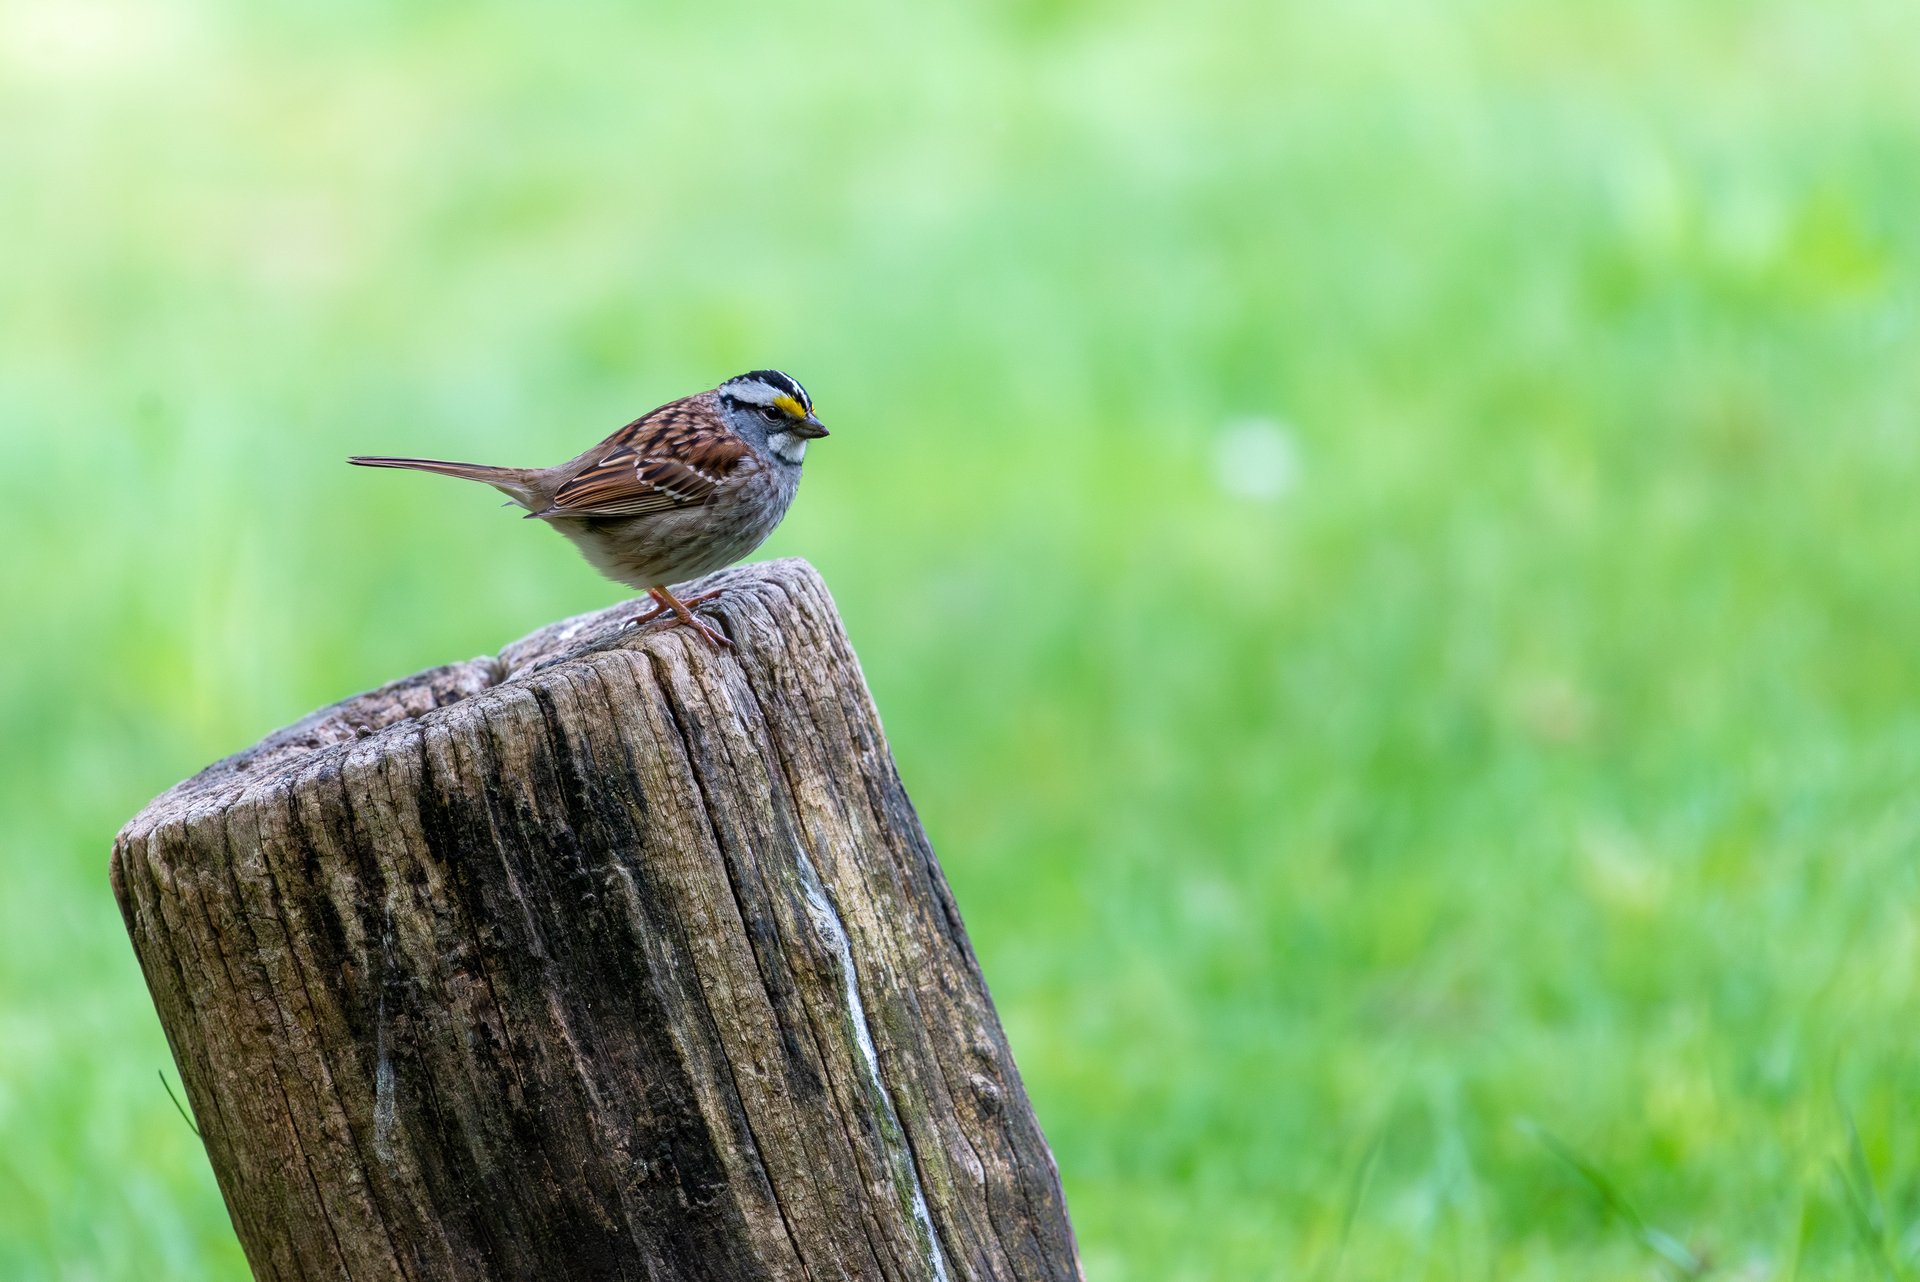 White-throated Sparrow perched on stump